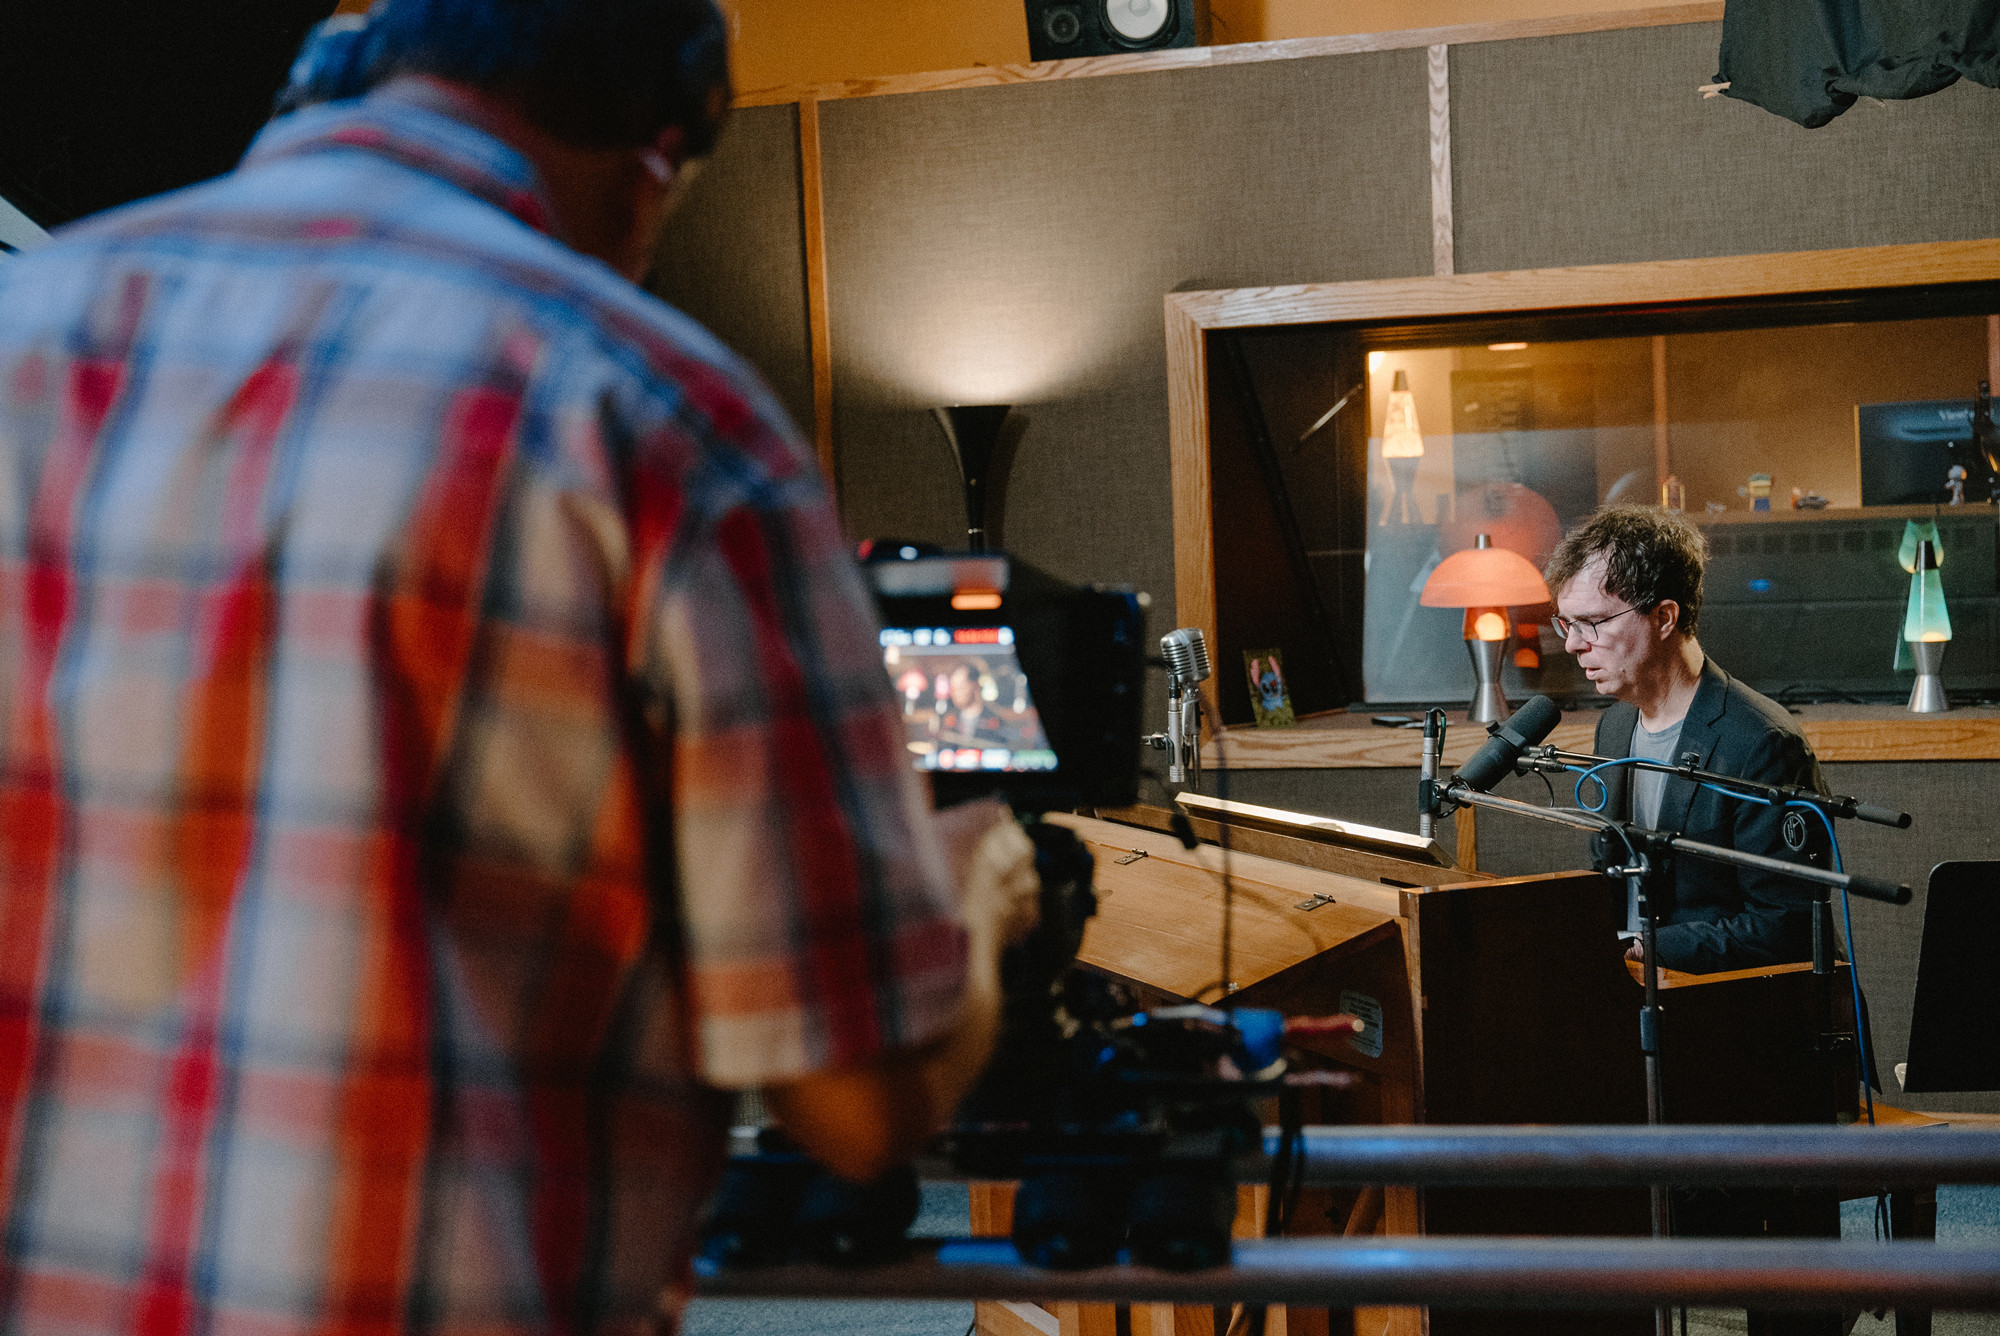 Production team filming Ben Folds playing piano.